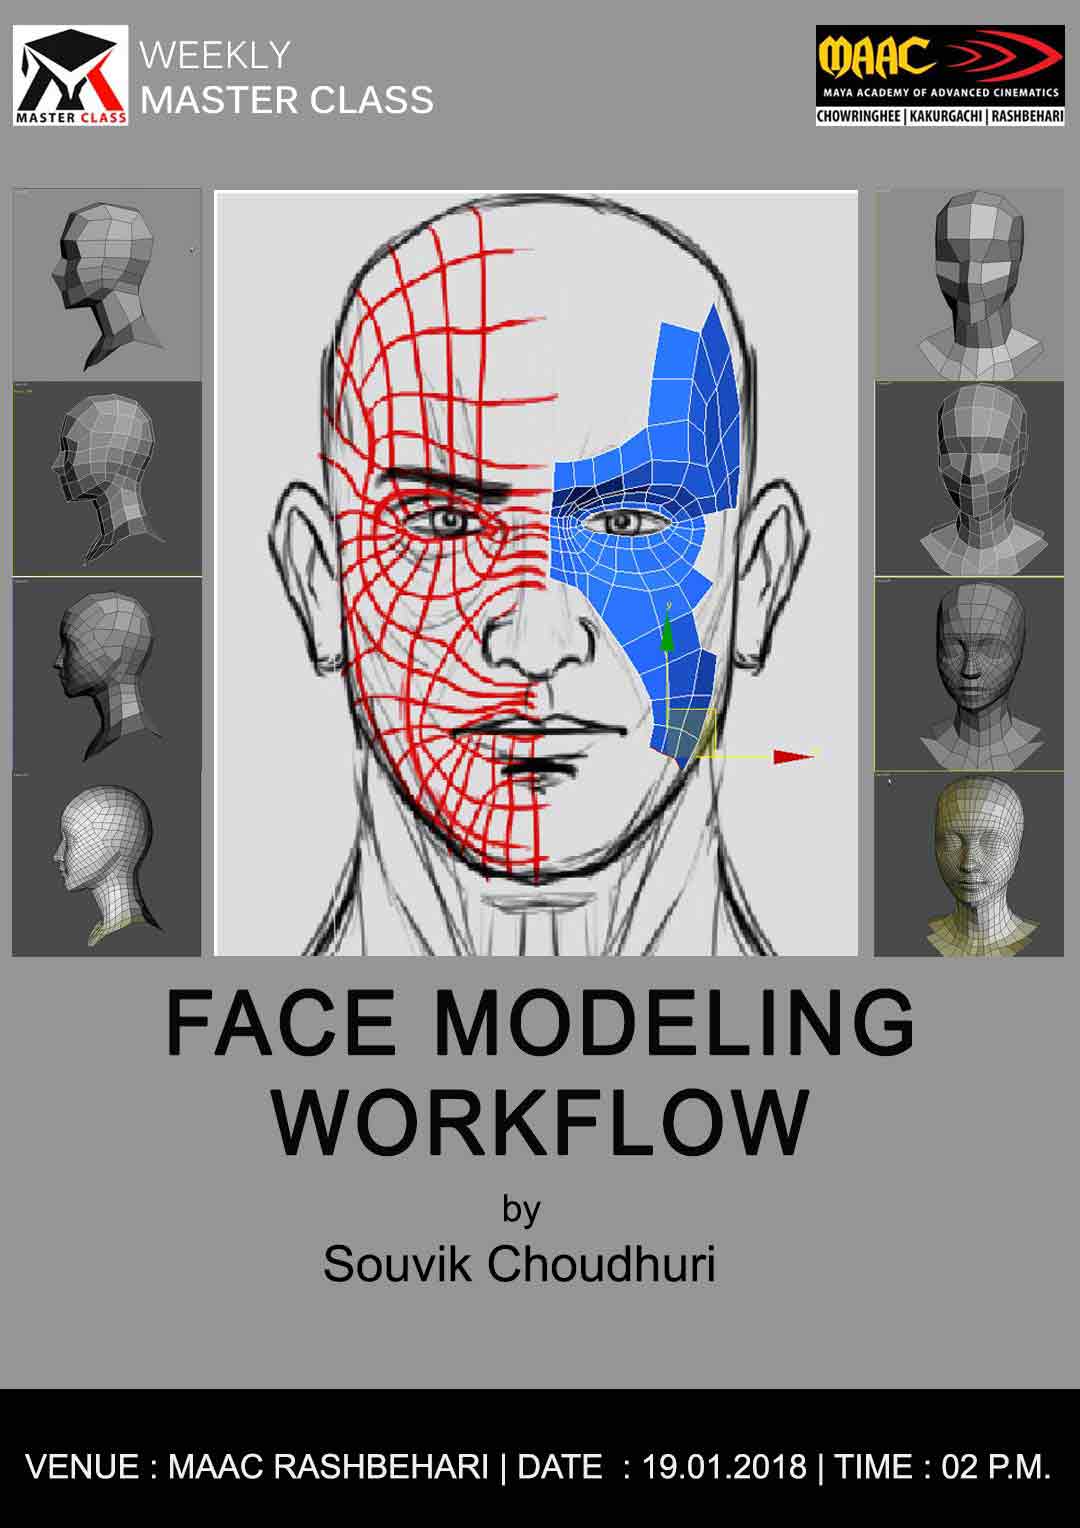 Weekly Master Class on Face Modeling Workflow